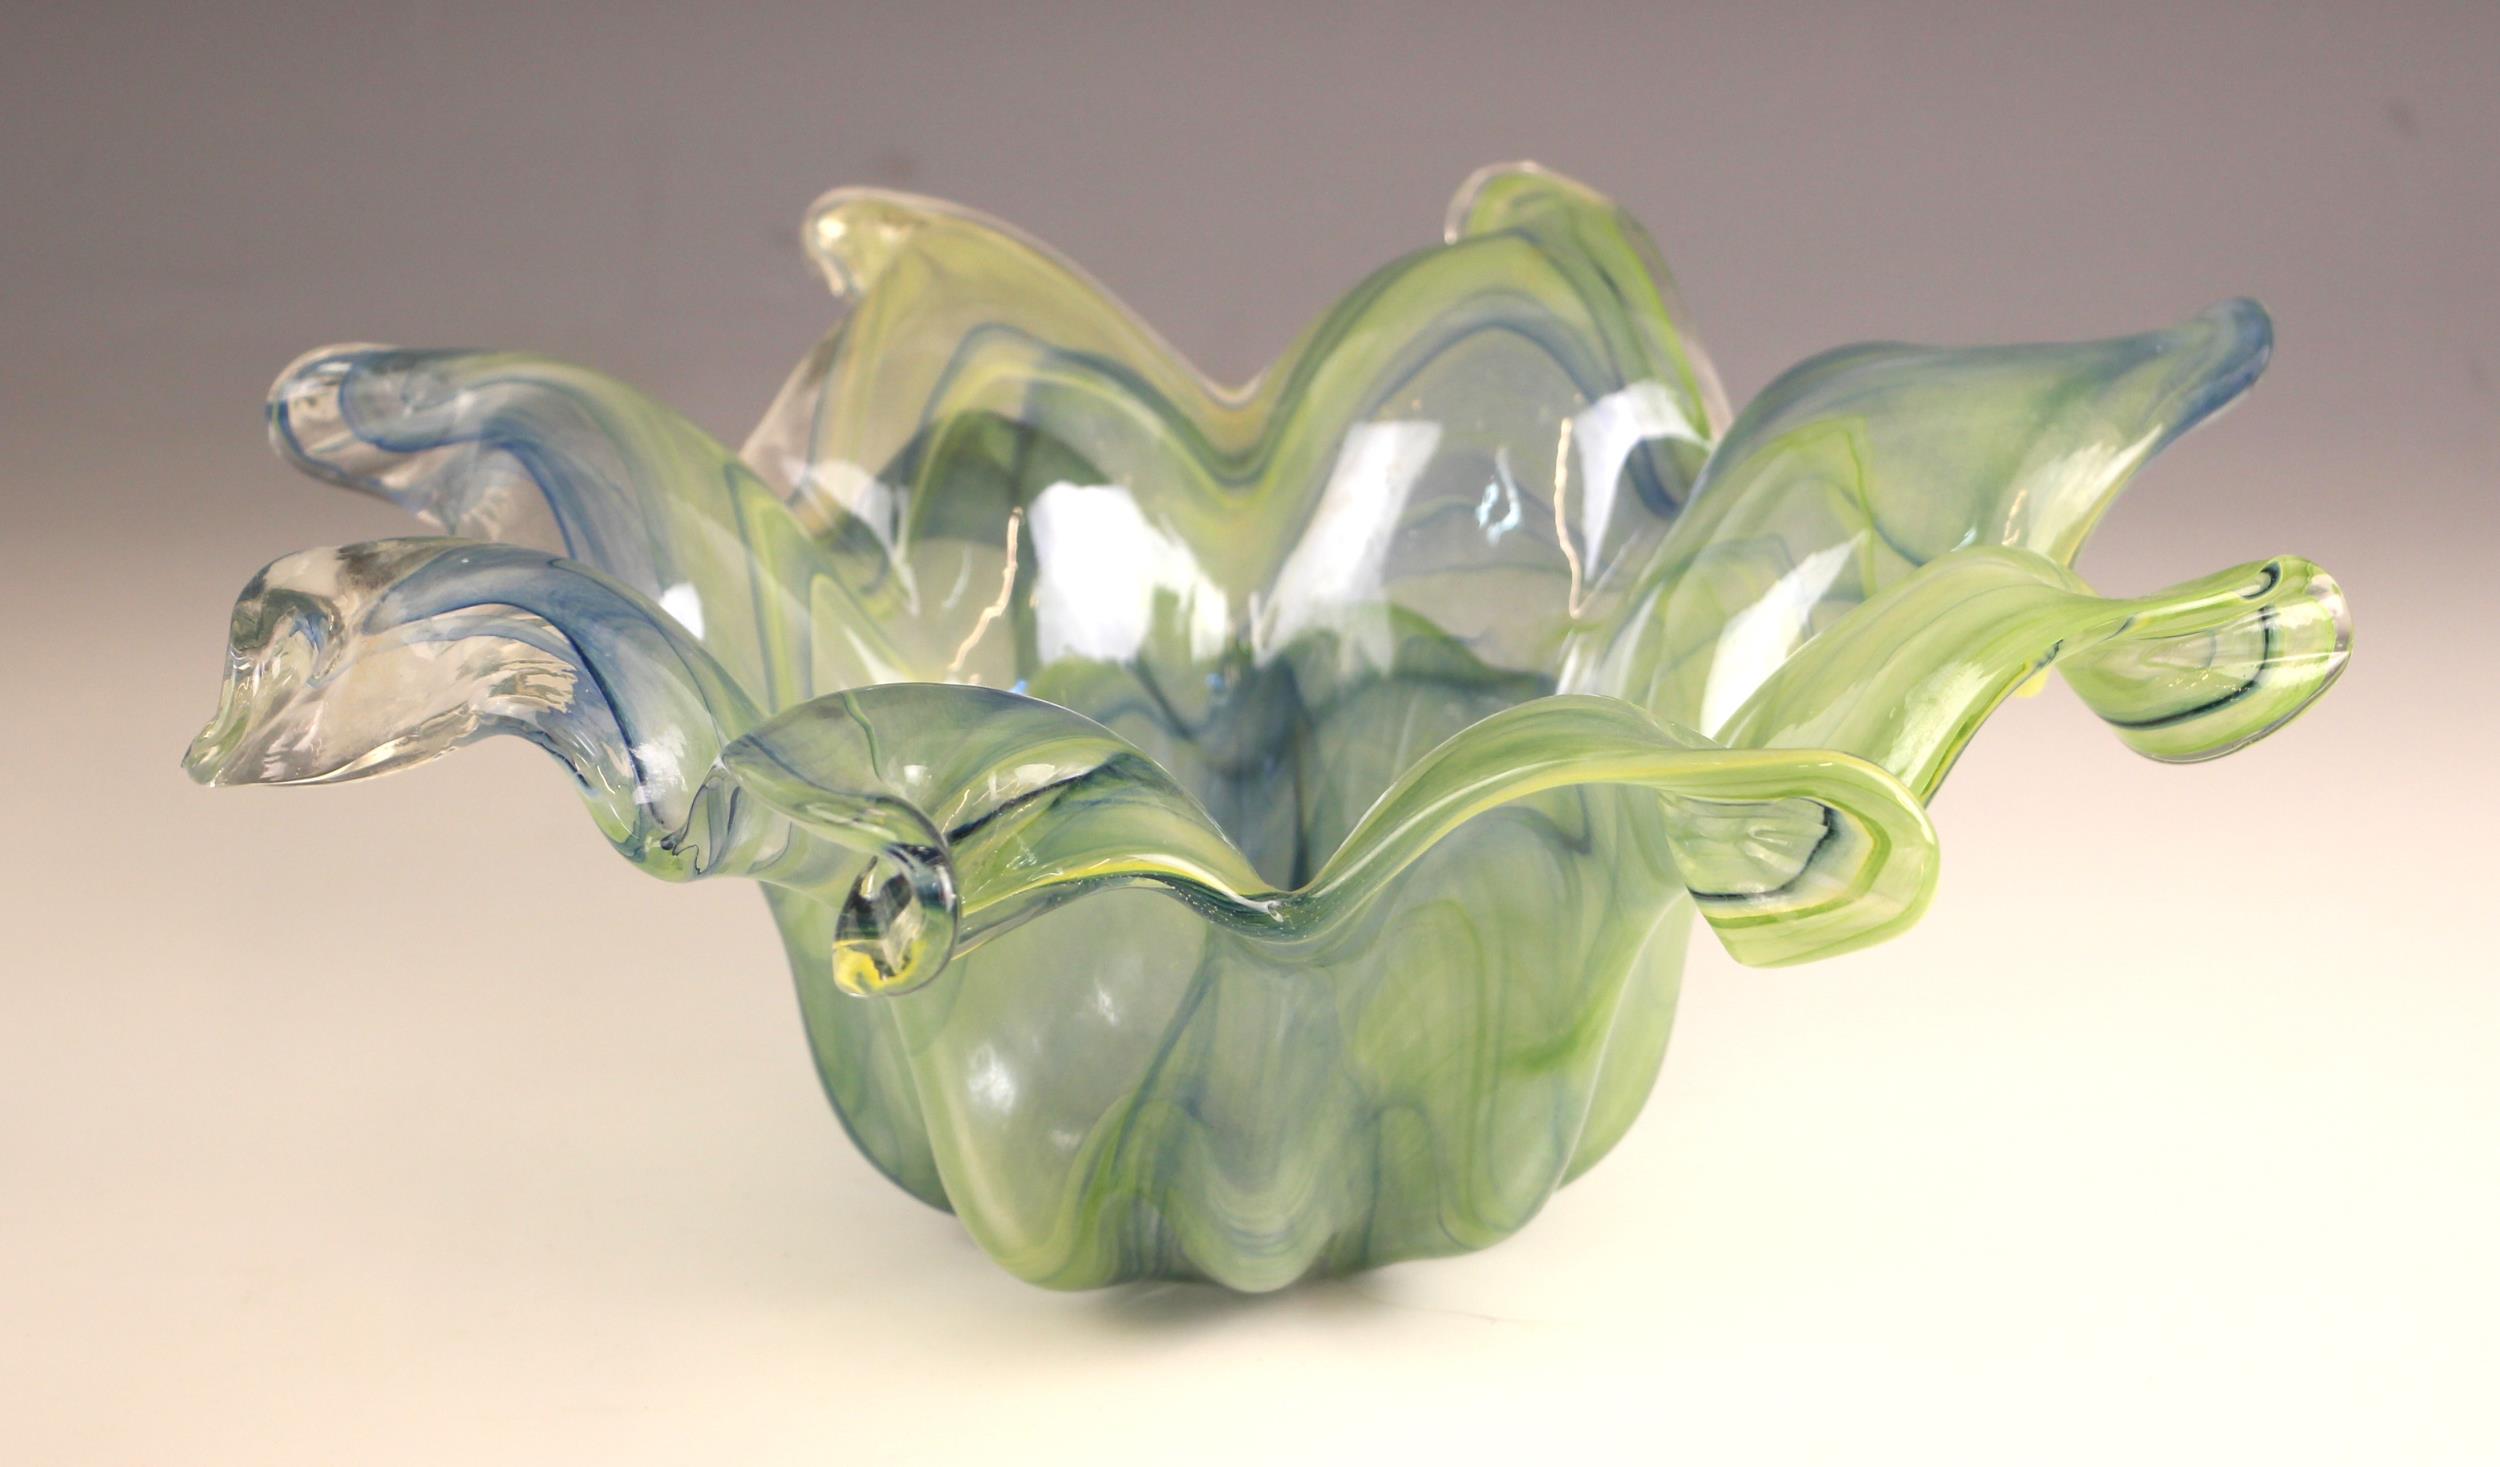 A Murano glass style flower head vase, 20th century decorated in green and blue colourways, 16.5cm - Image 2 of 2